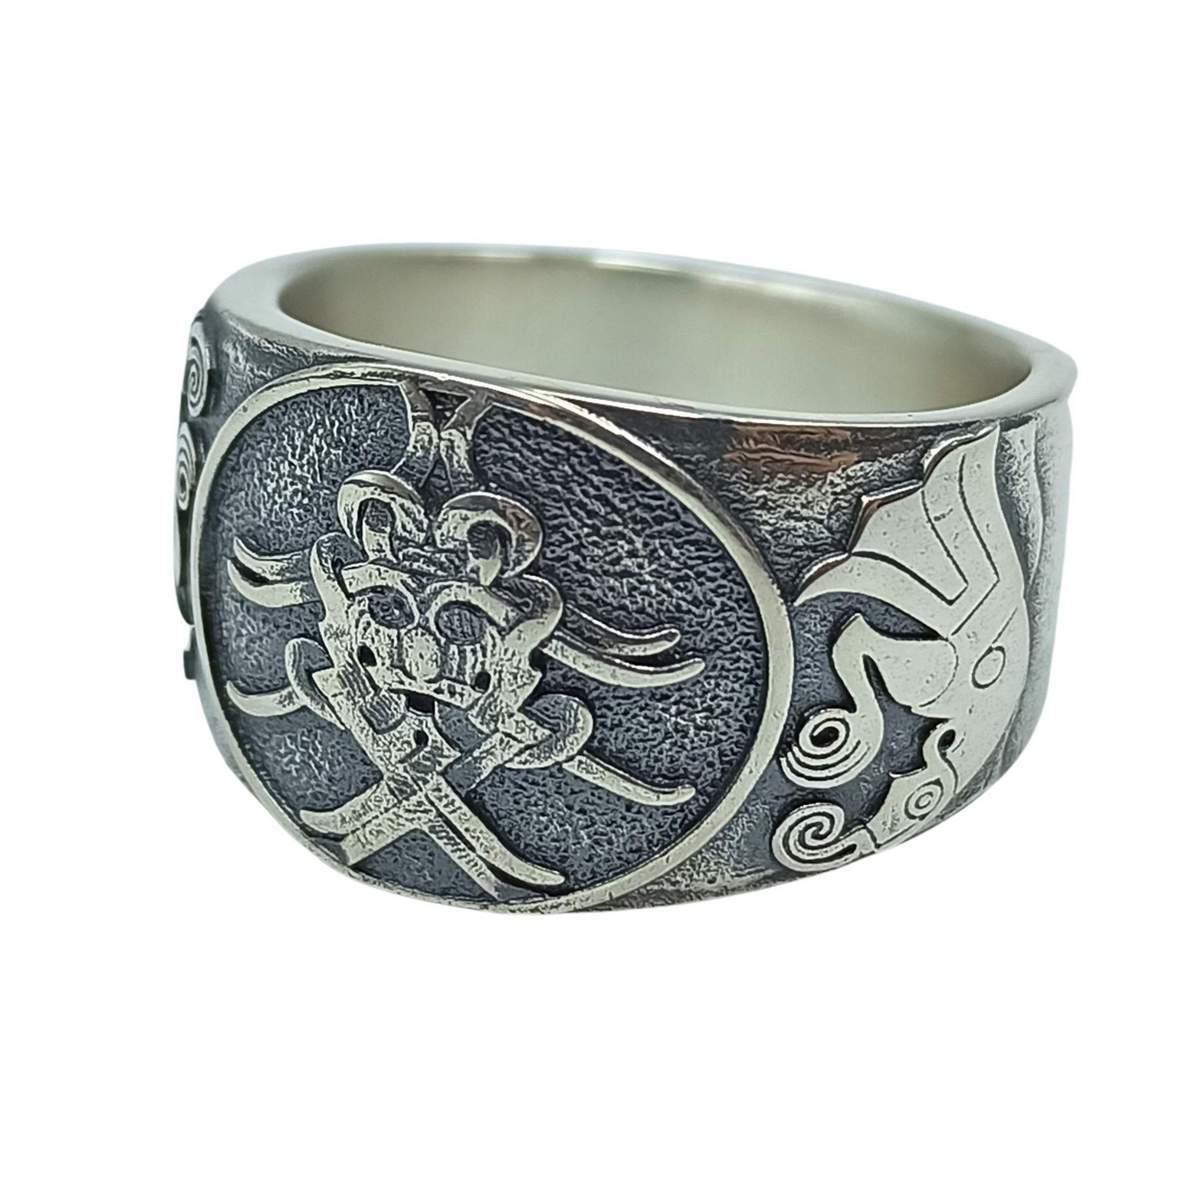 Mask of Odin norse silver ring 6 US/CA  